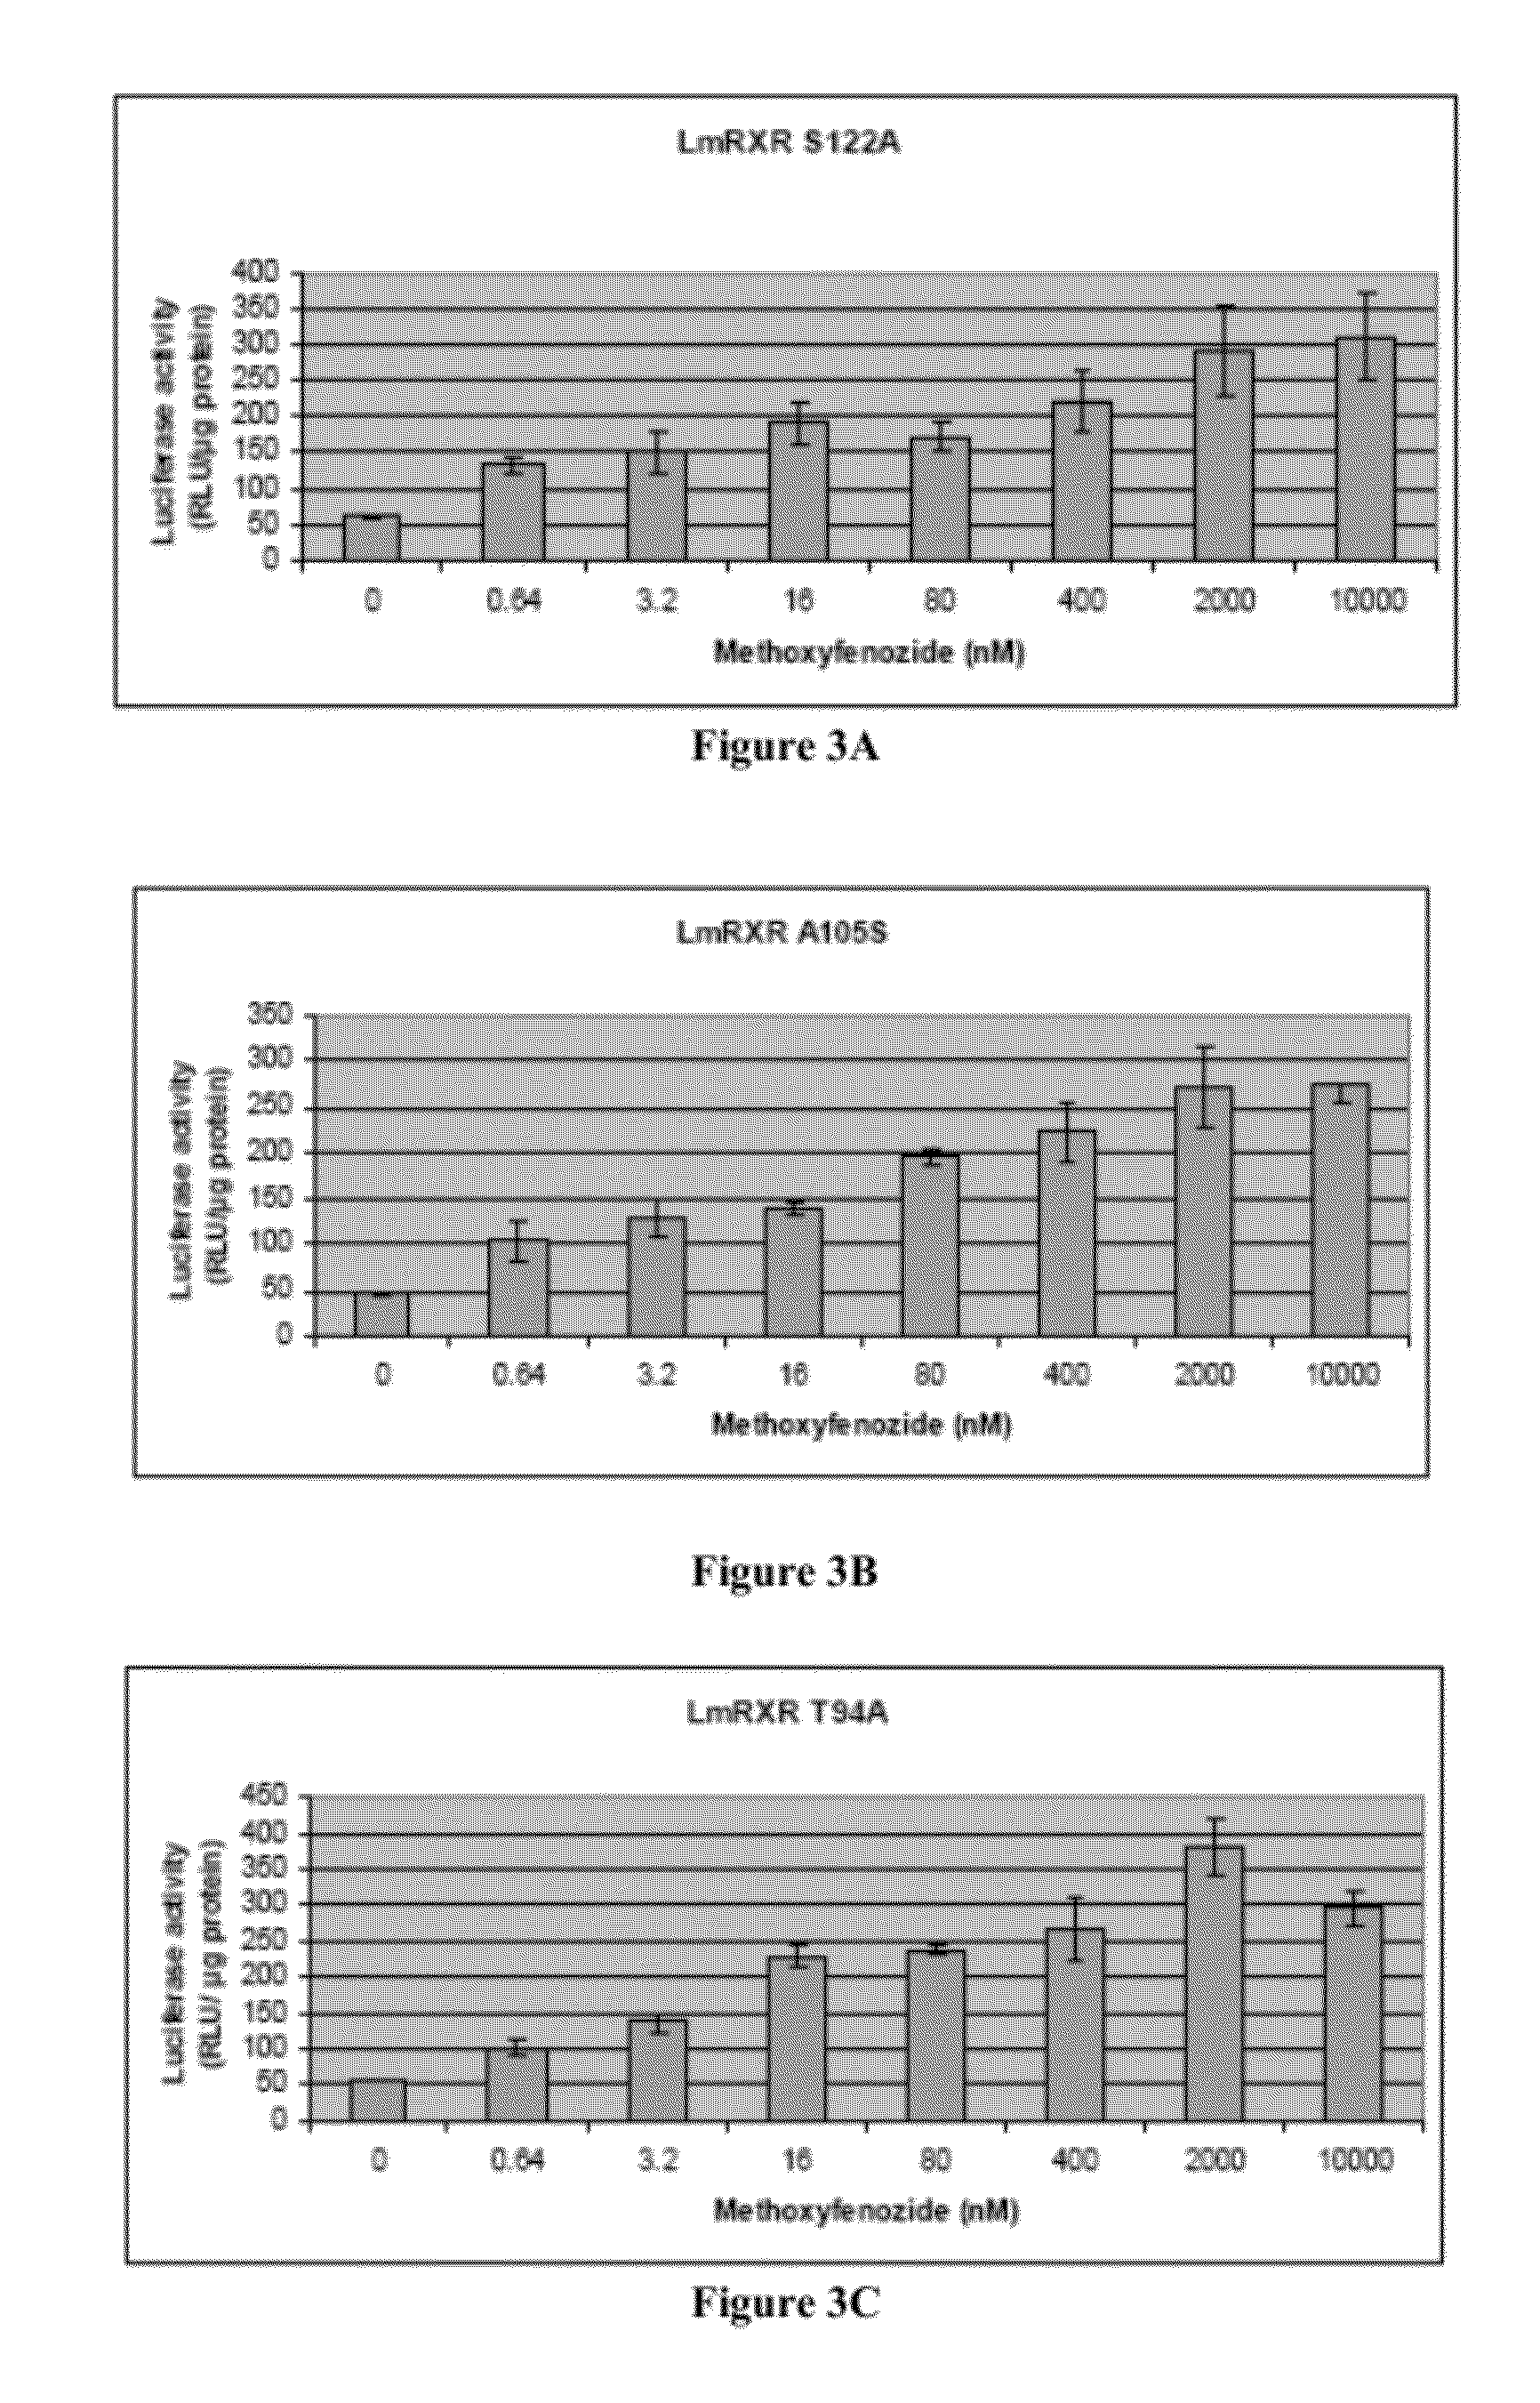 Gene expression modulation system for use in plants and method for modulating gene expression in plants